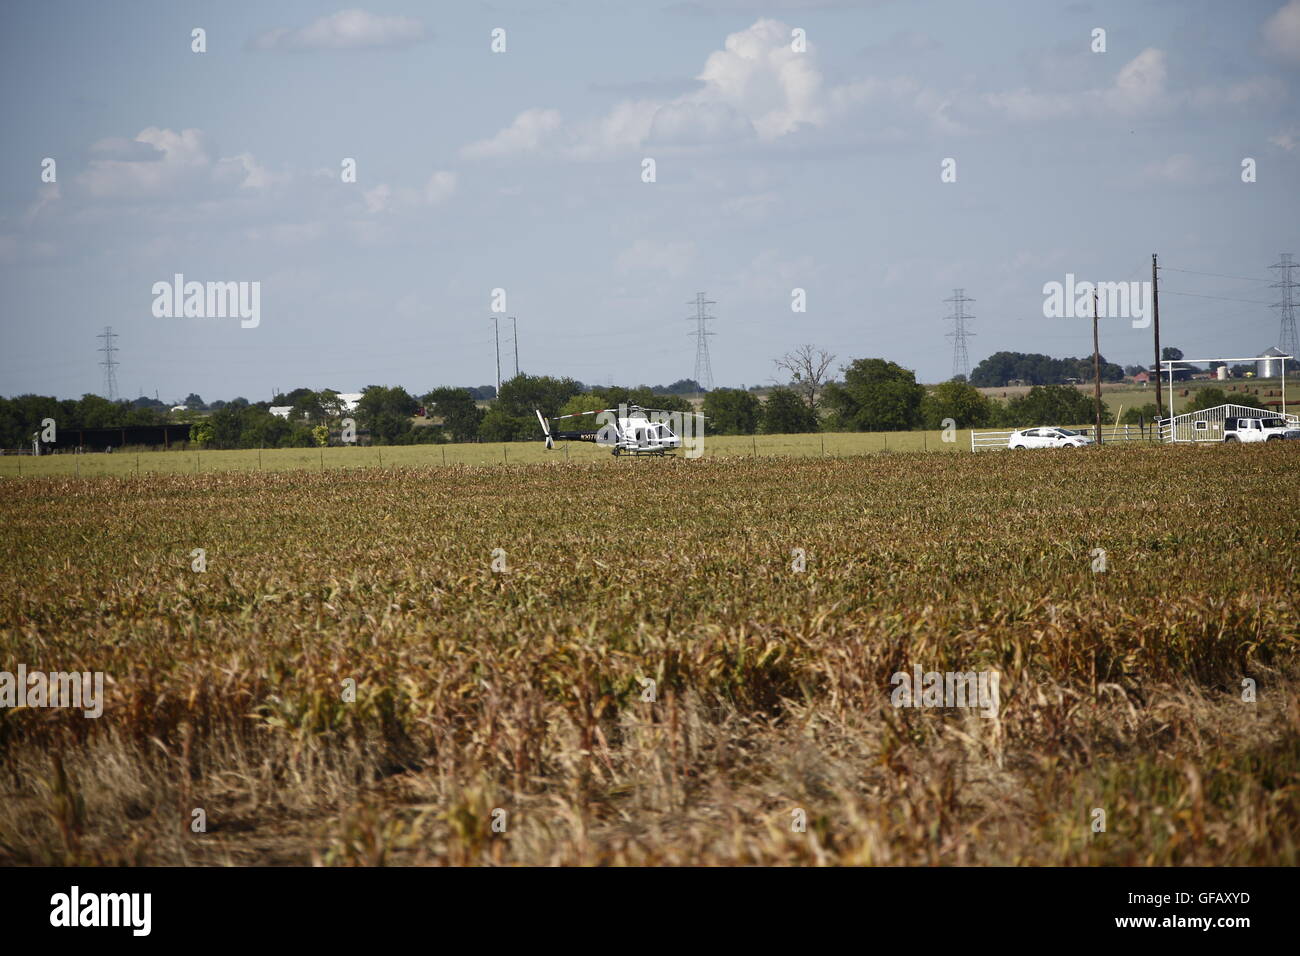 (160731) -- LOCKHART, July 31, 2016 (Xinhua) -- A helicopter is seen at the site of a balloon crash accident near Lockhart, a city in the central part of the U.S. state of Texas, July 30, 2016. U.S. Texas Department of PUBLIC Safety has confirmed that 16 people were killed on Saturday morning after a hot air balloon caught on fire and crashed near Lockhart. The accident occurred shortly after 7:40 a.m. local time on Saturday near Lockhart, when the hot air balloon with at least 16 people on board crashed into a pasture, the Federal Aviation Administration (FAA) said in a statement on Saturday. Stock Photo